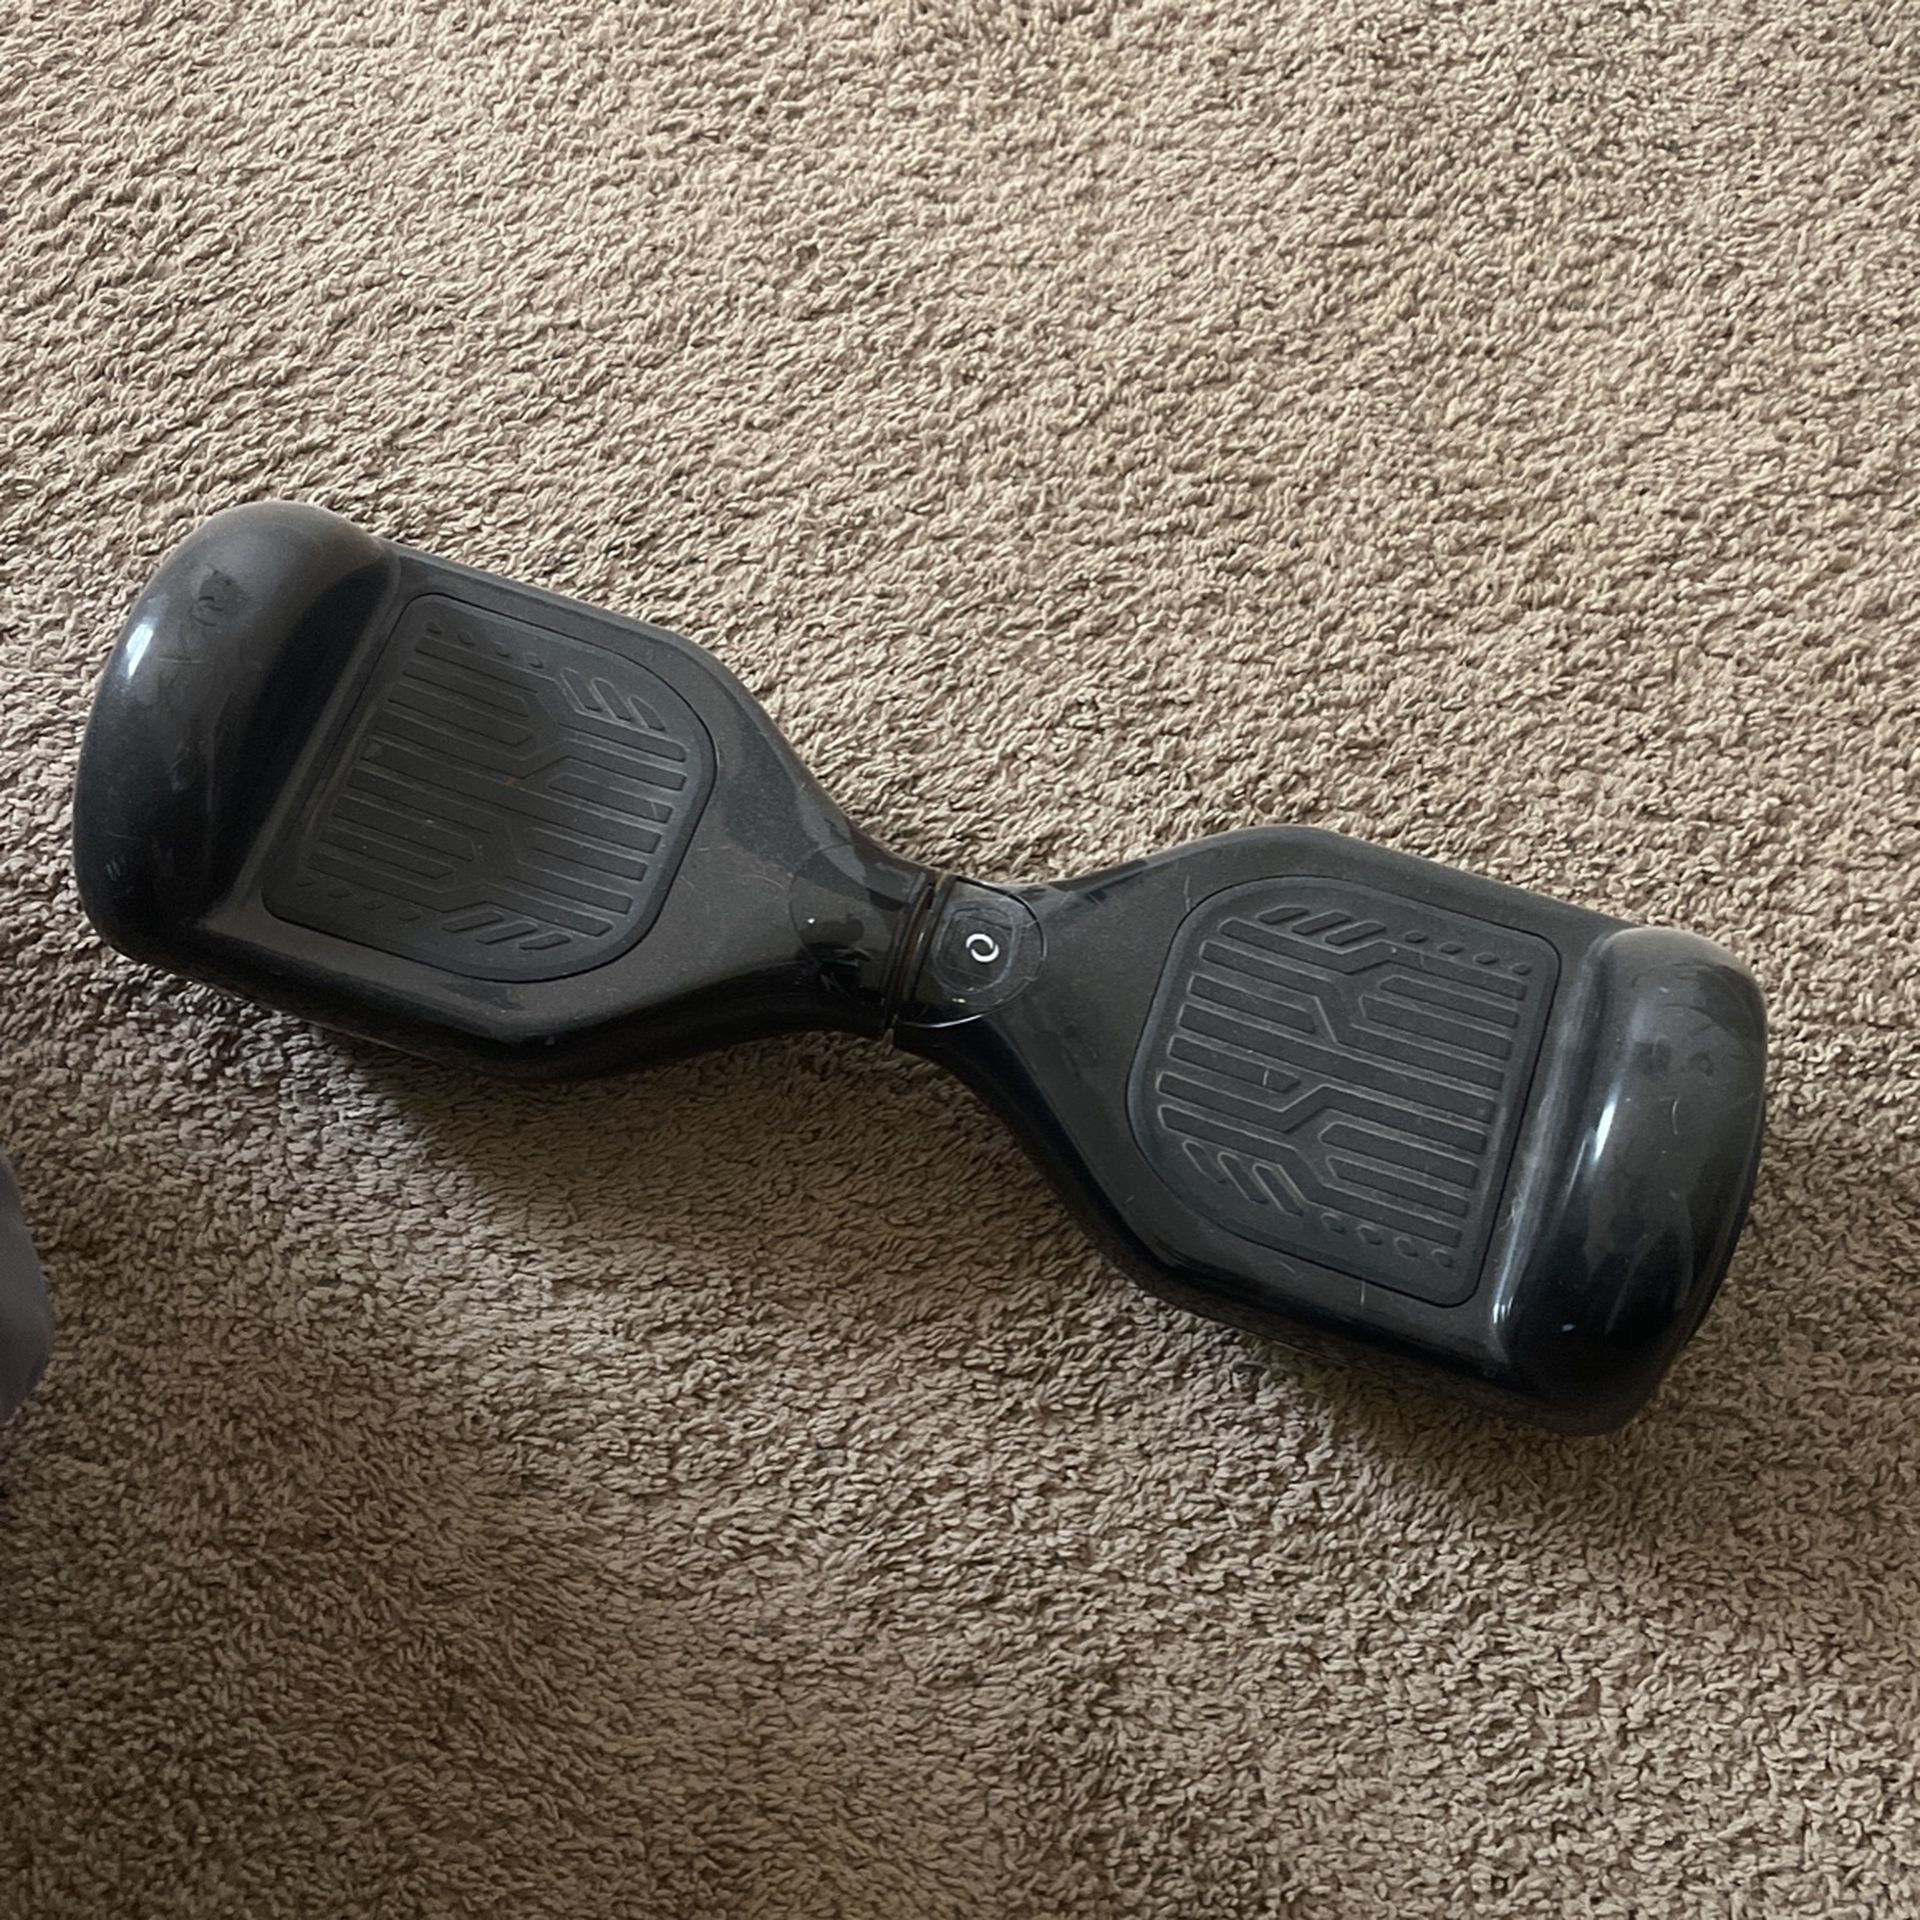 Hover Board-no Charger But Works